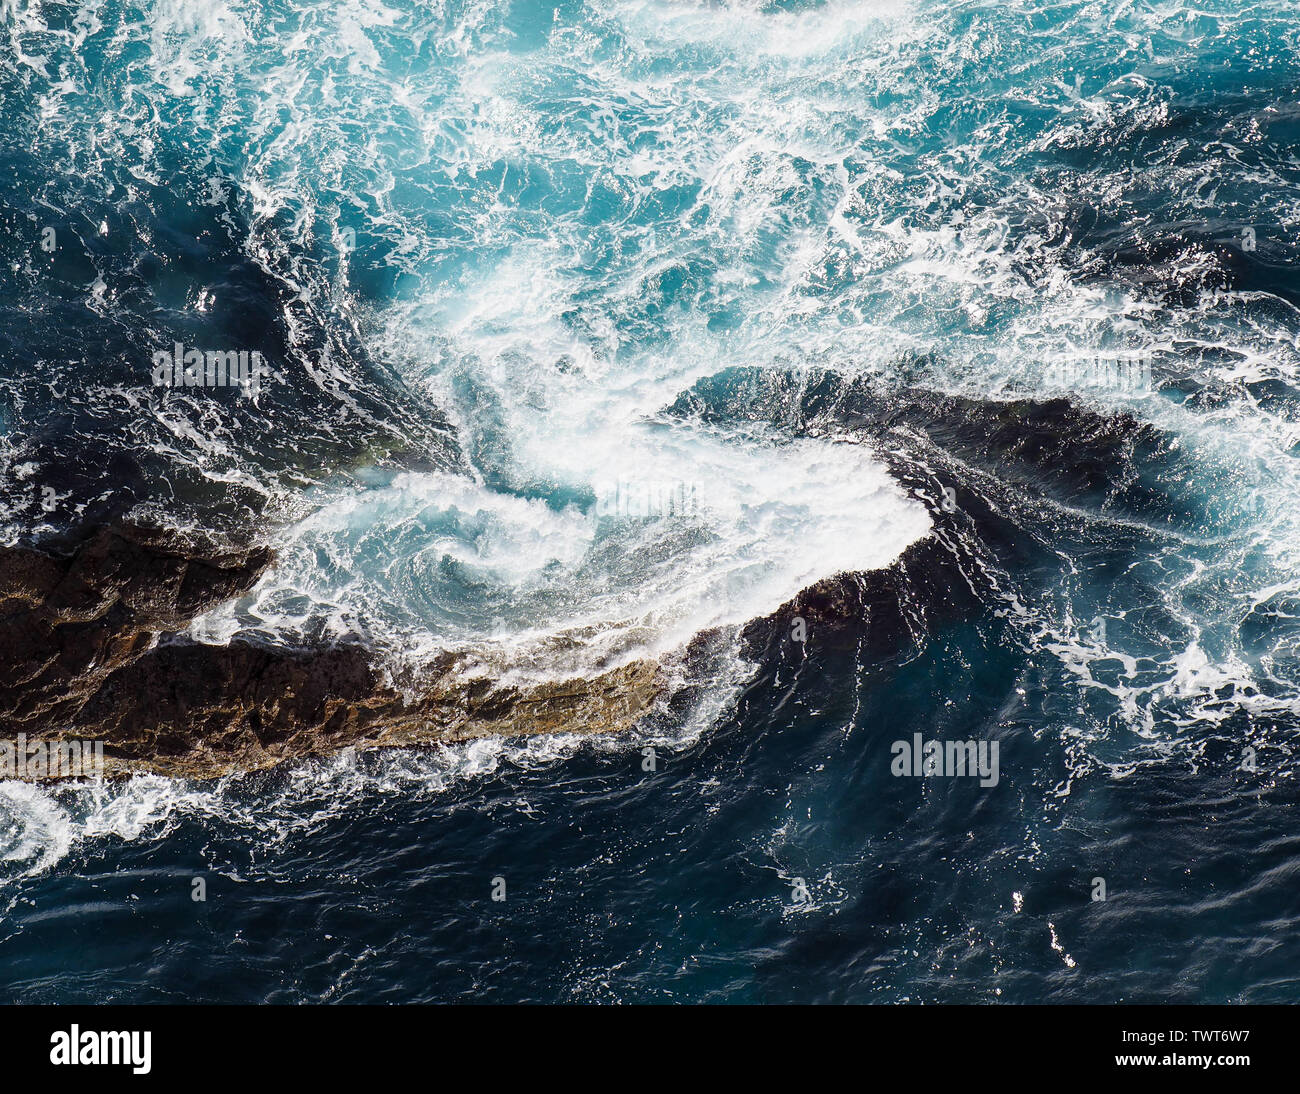 Sea water swirling and churning around rocks, blue and white, Pacific Ocean, Forster NSW, Australia Stock Photo